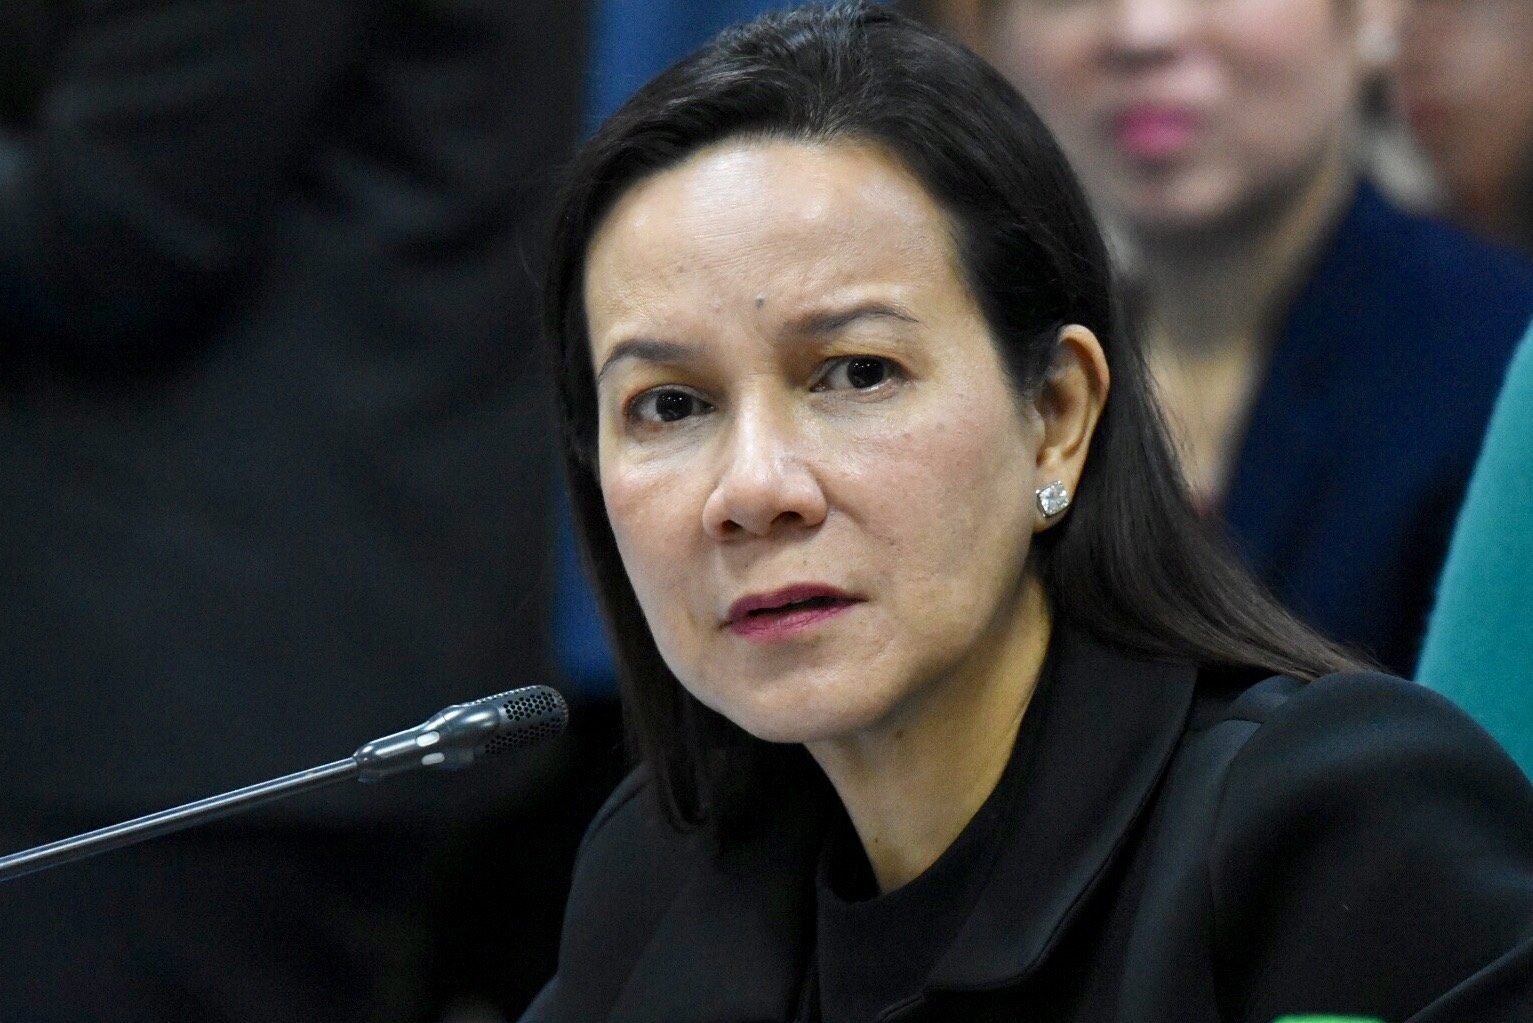 Poe: Release ‘made in China’ loan contracts in full for public scrutiny